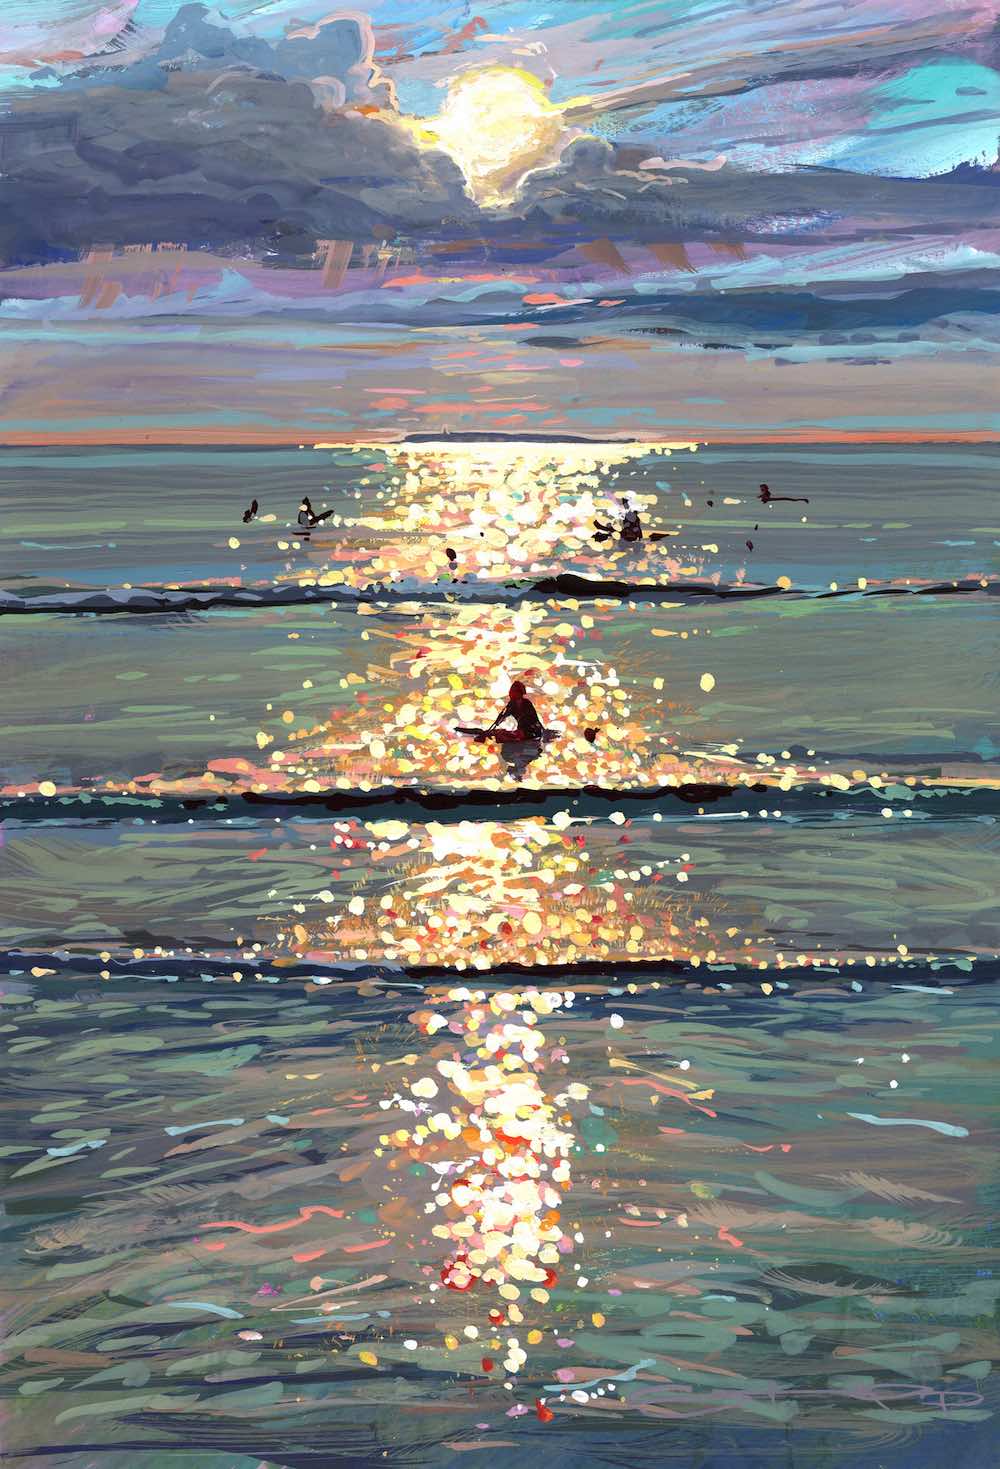 Glassing Off Nicely colourful painting of surfers at sunset